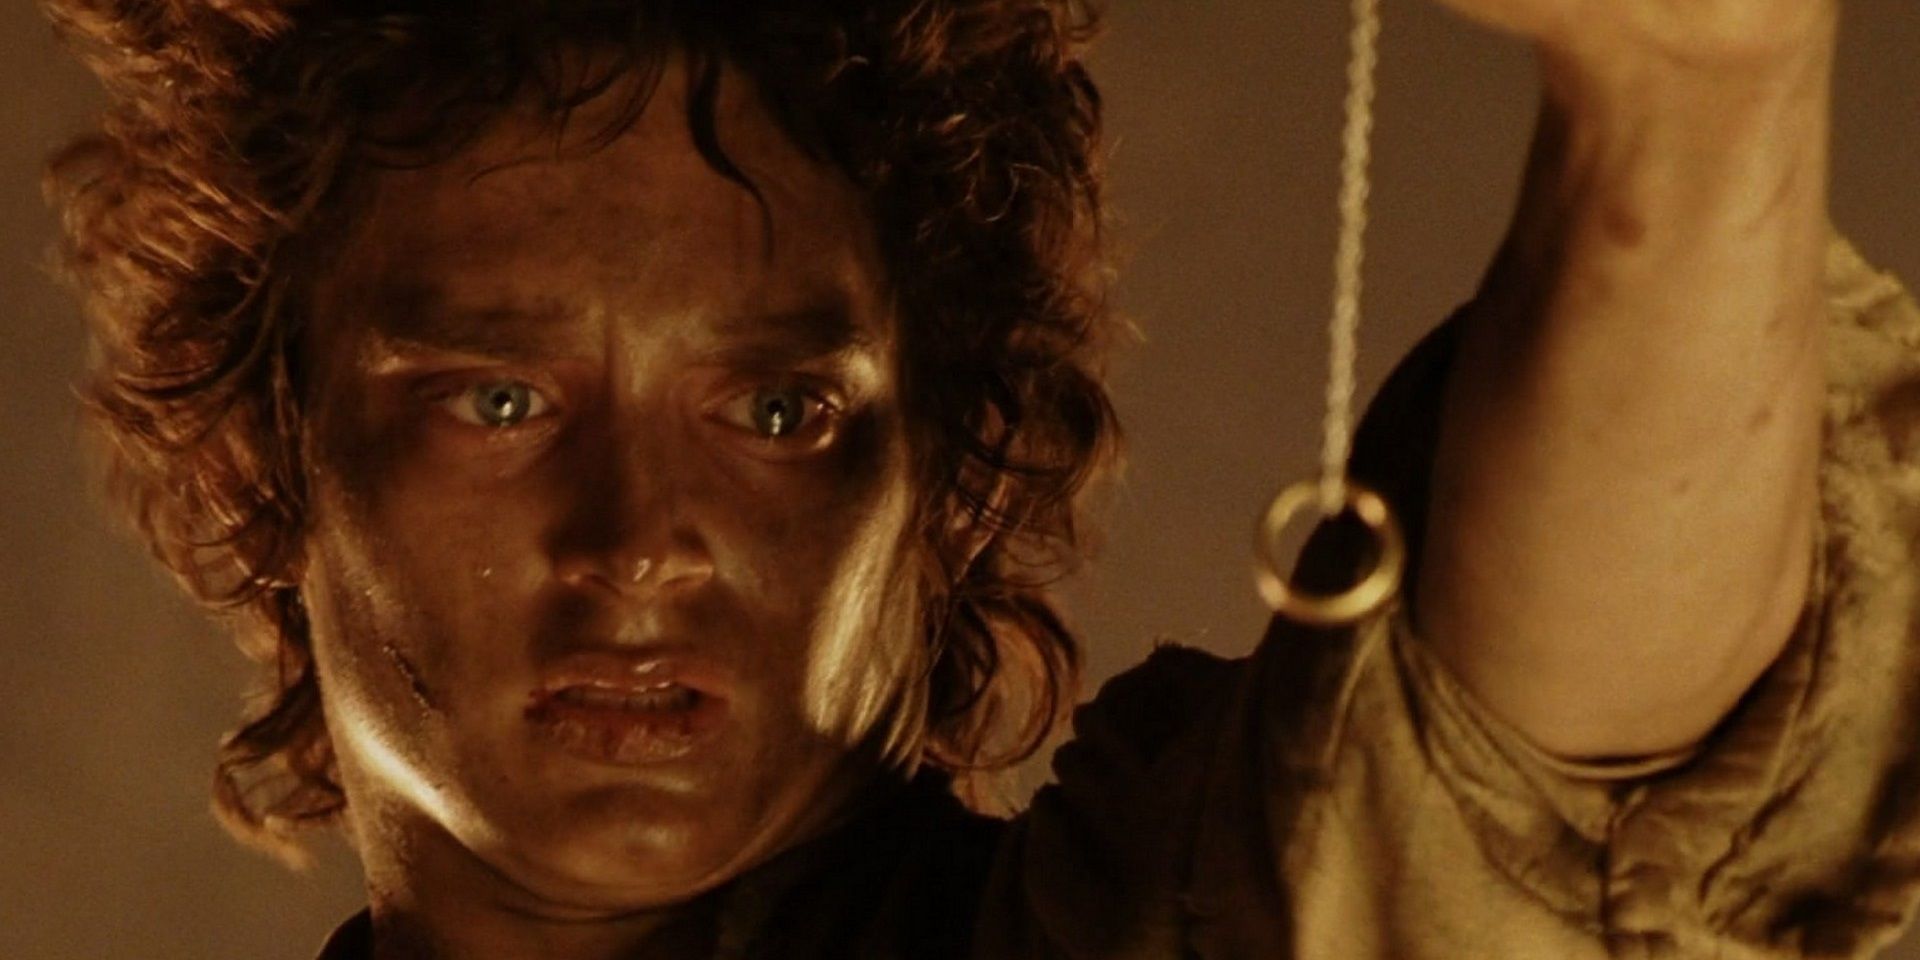 Frodo holding the ring in The Lord of the Rings The Return of the King